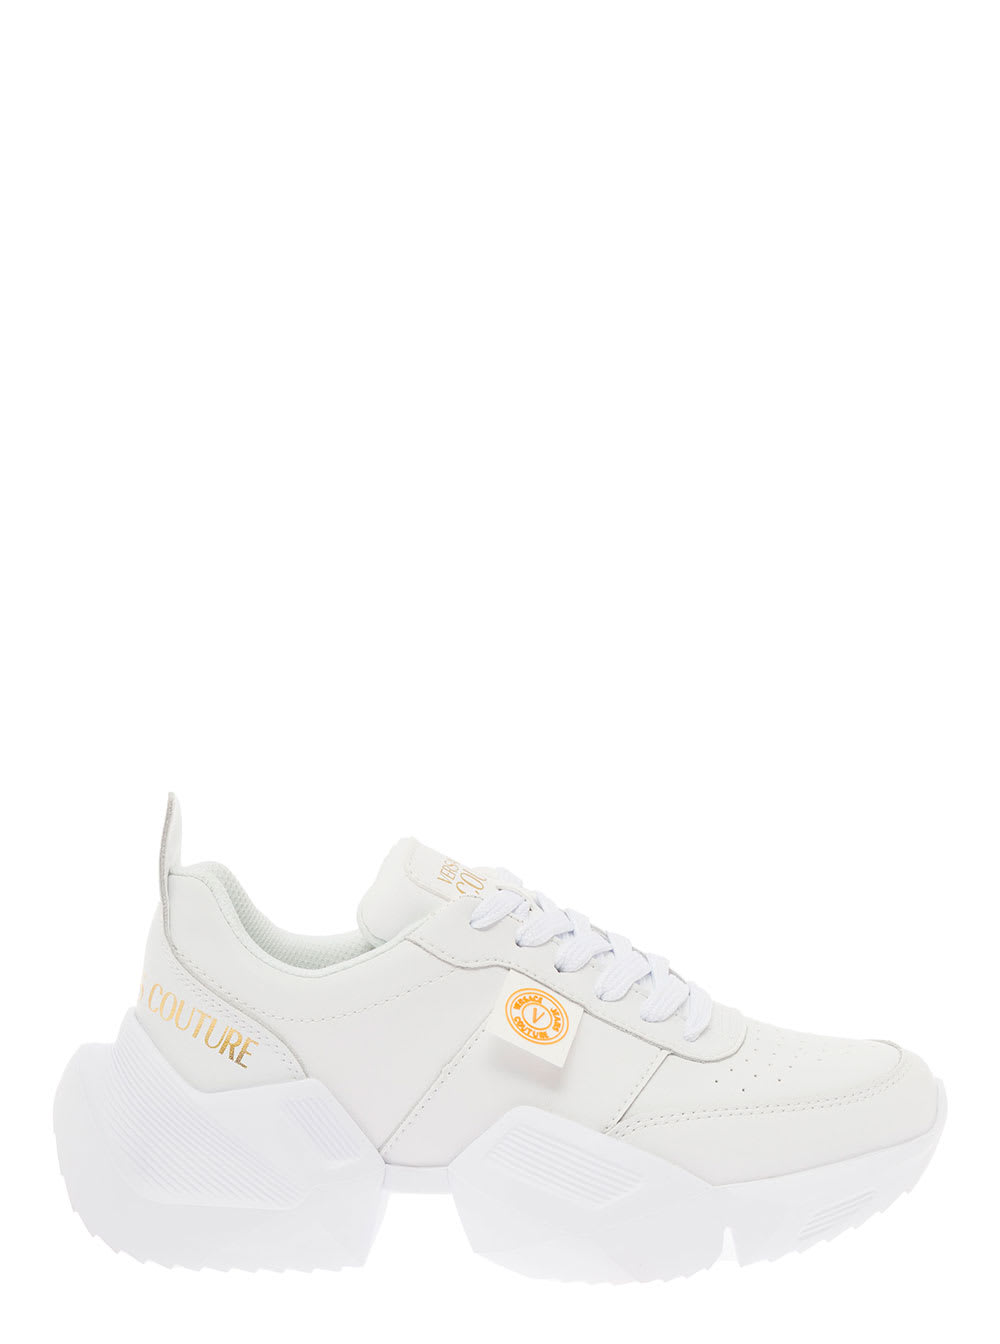 Versace Jeans Couture Womens White Leather Sneakers With Logo